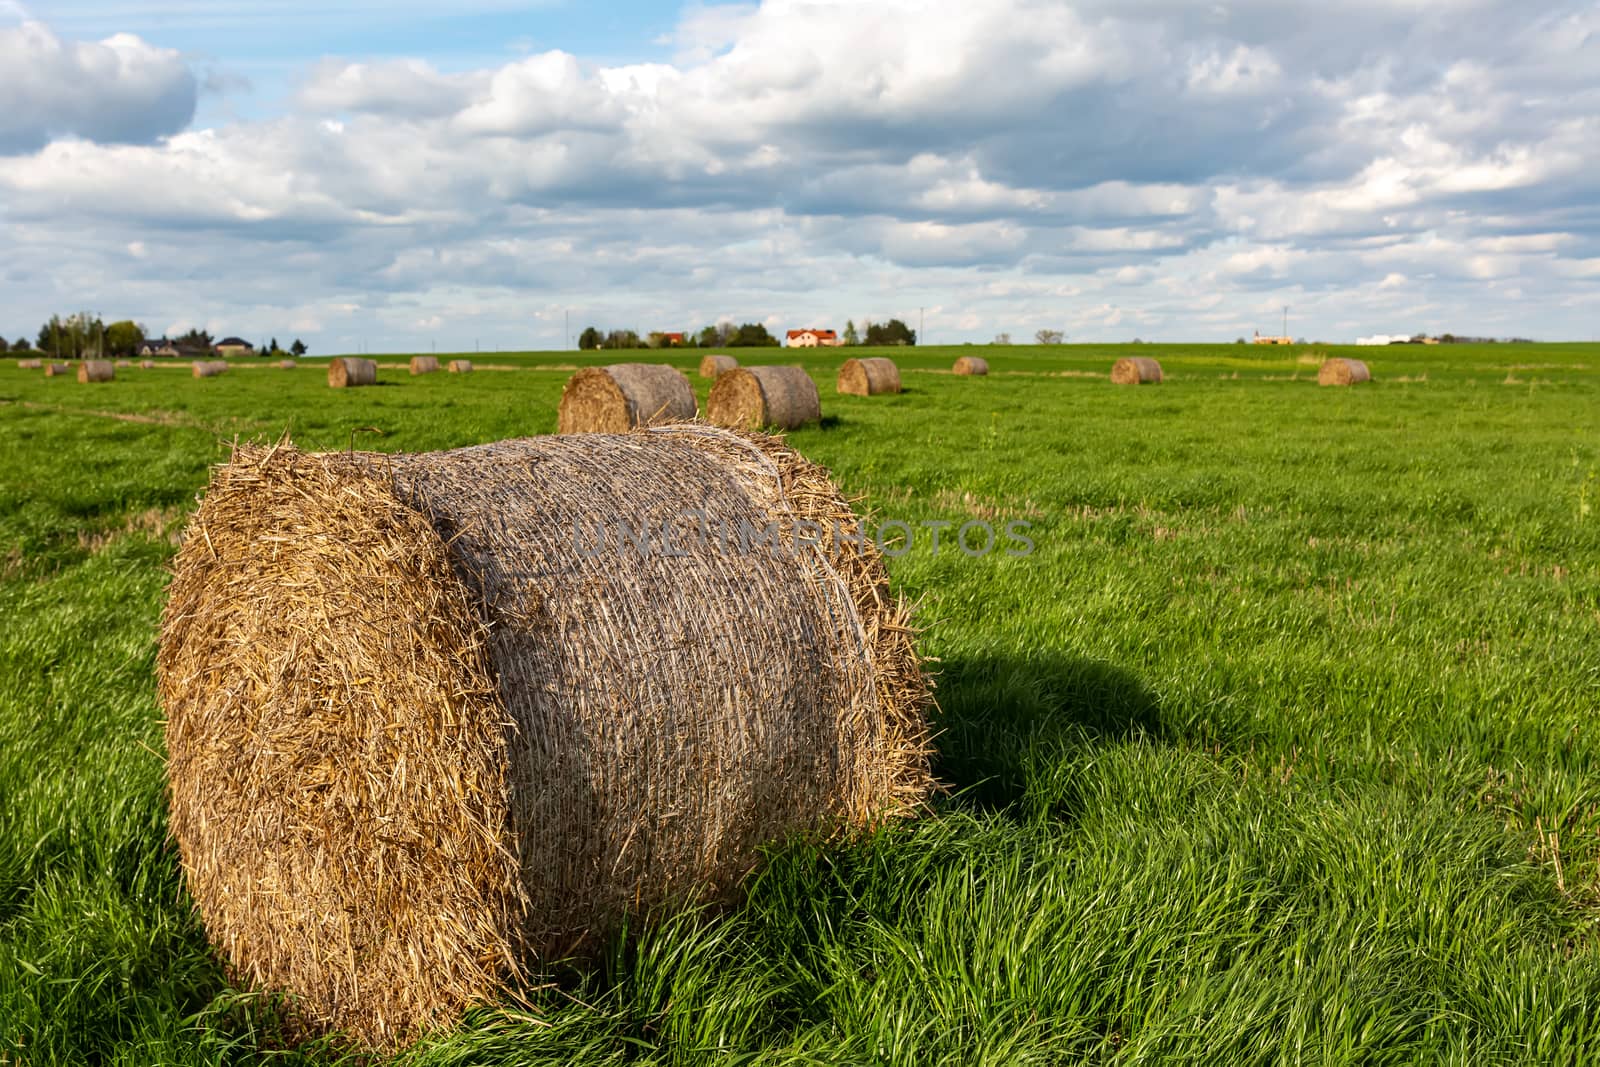 Hay bale on green lush grass against a blue sky. Livestock feed. by 977_ReX_977